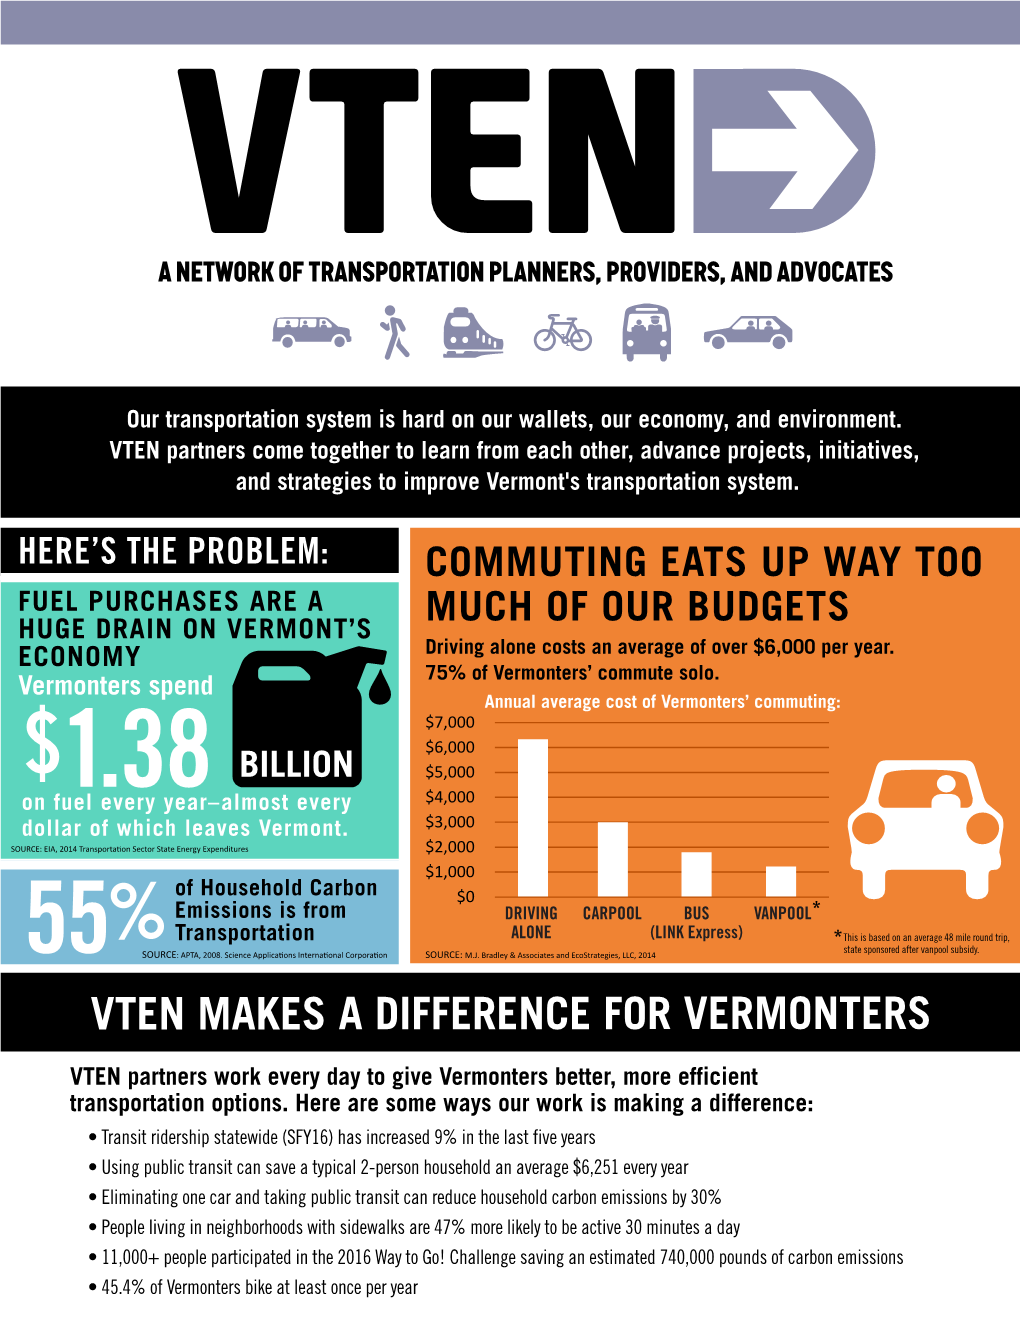 Vten Makes a Difference for Vermonters